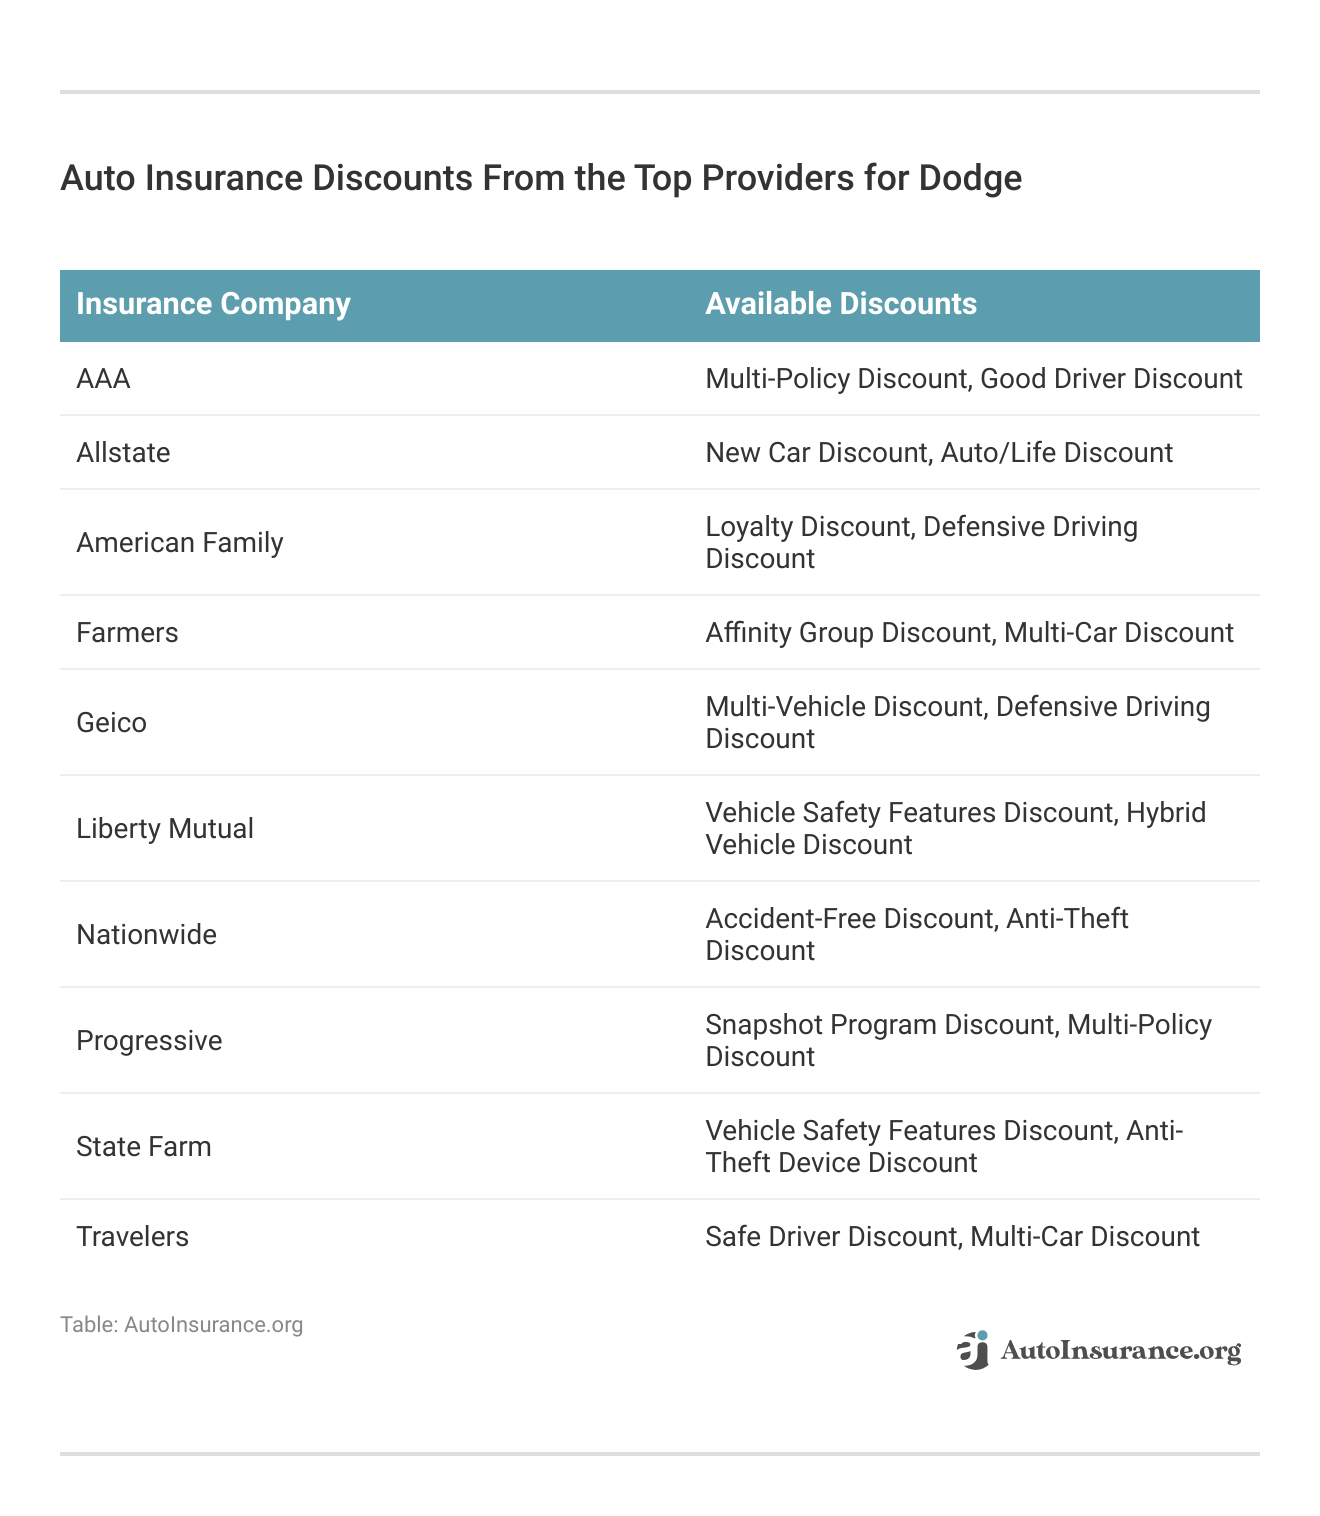 <h3>Auto Insurance Discounts From the Top Providers for Dodge</h3>